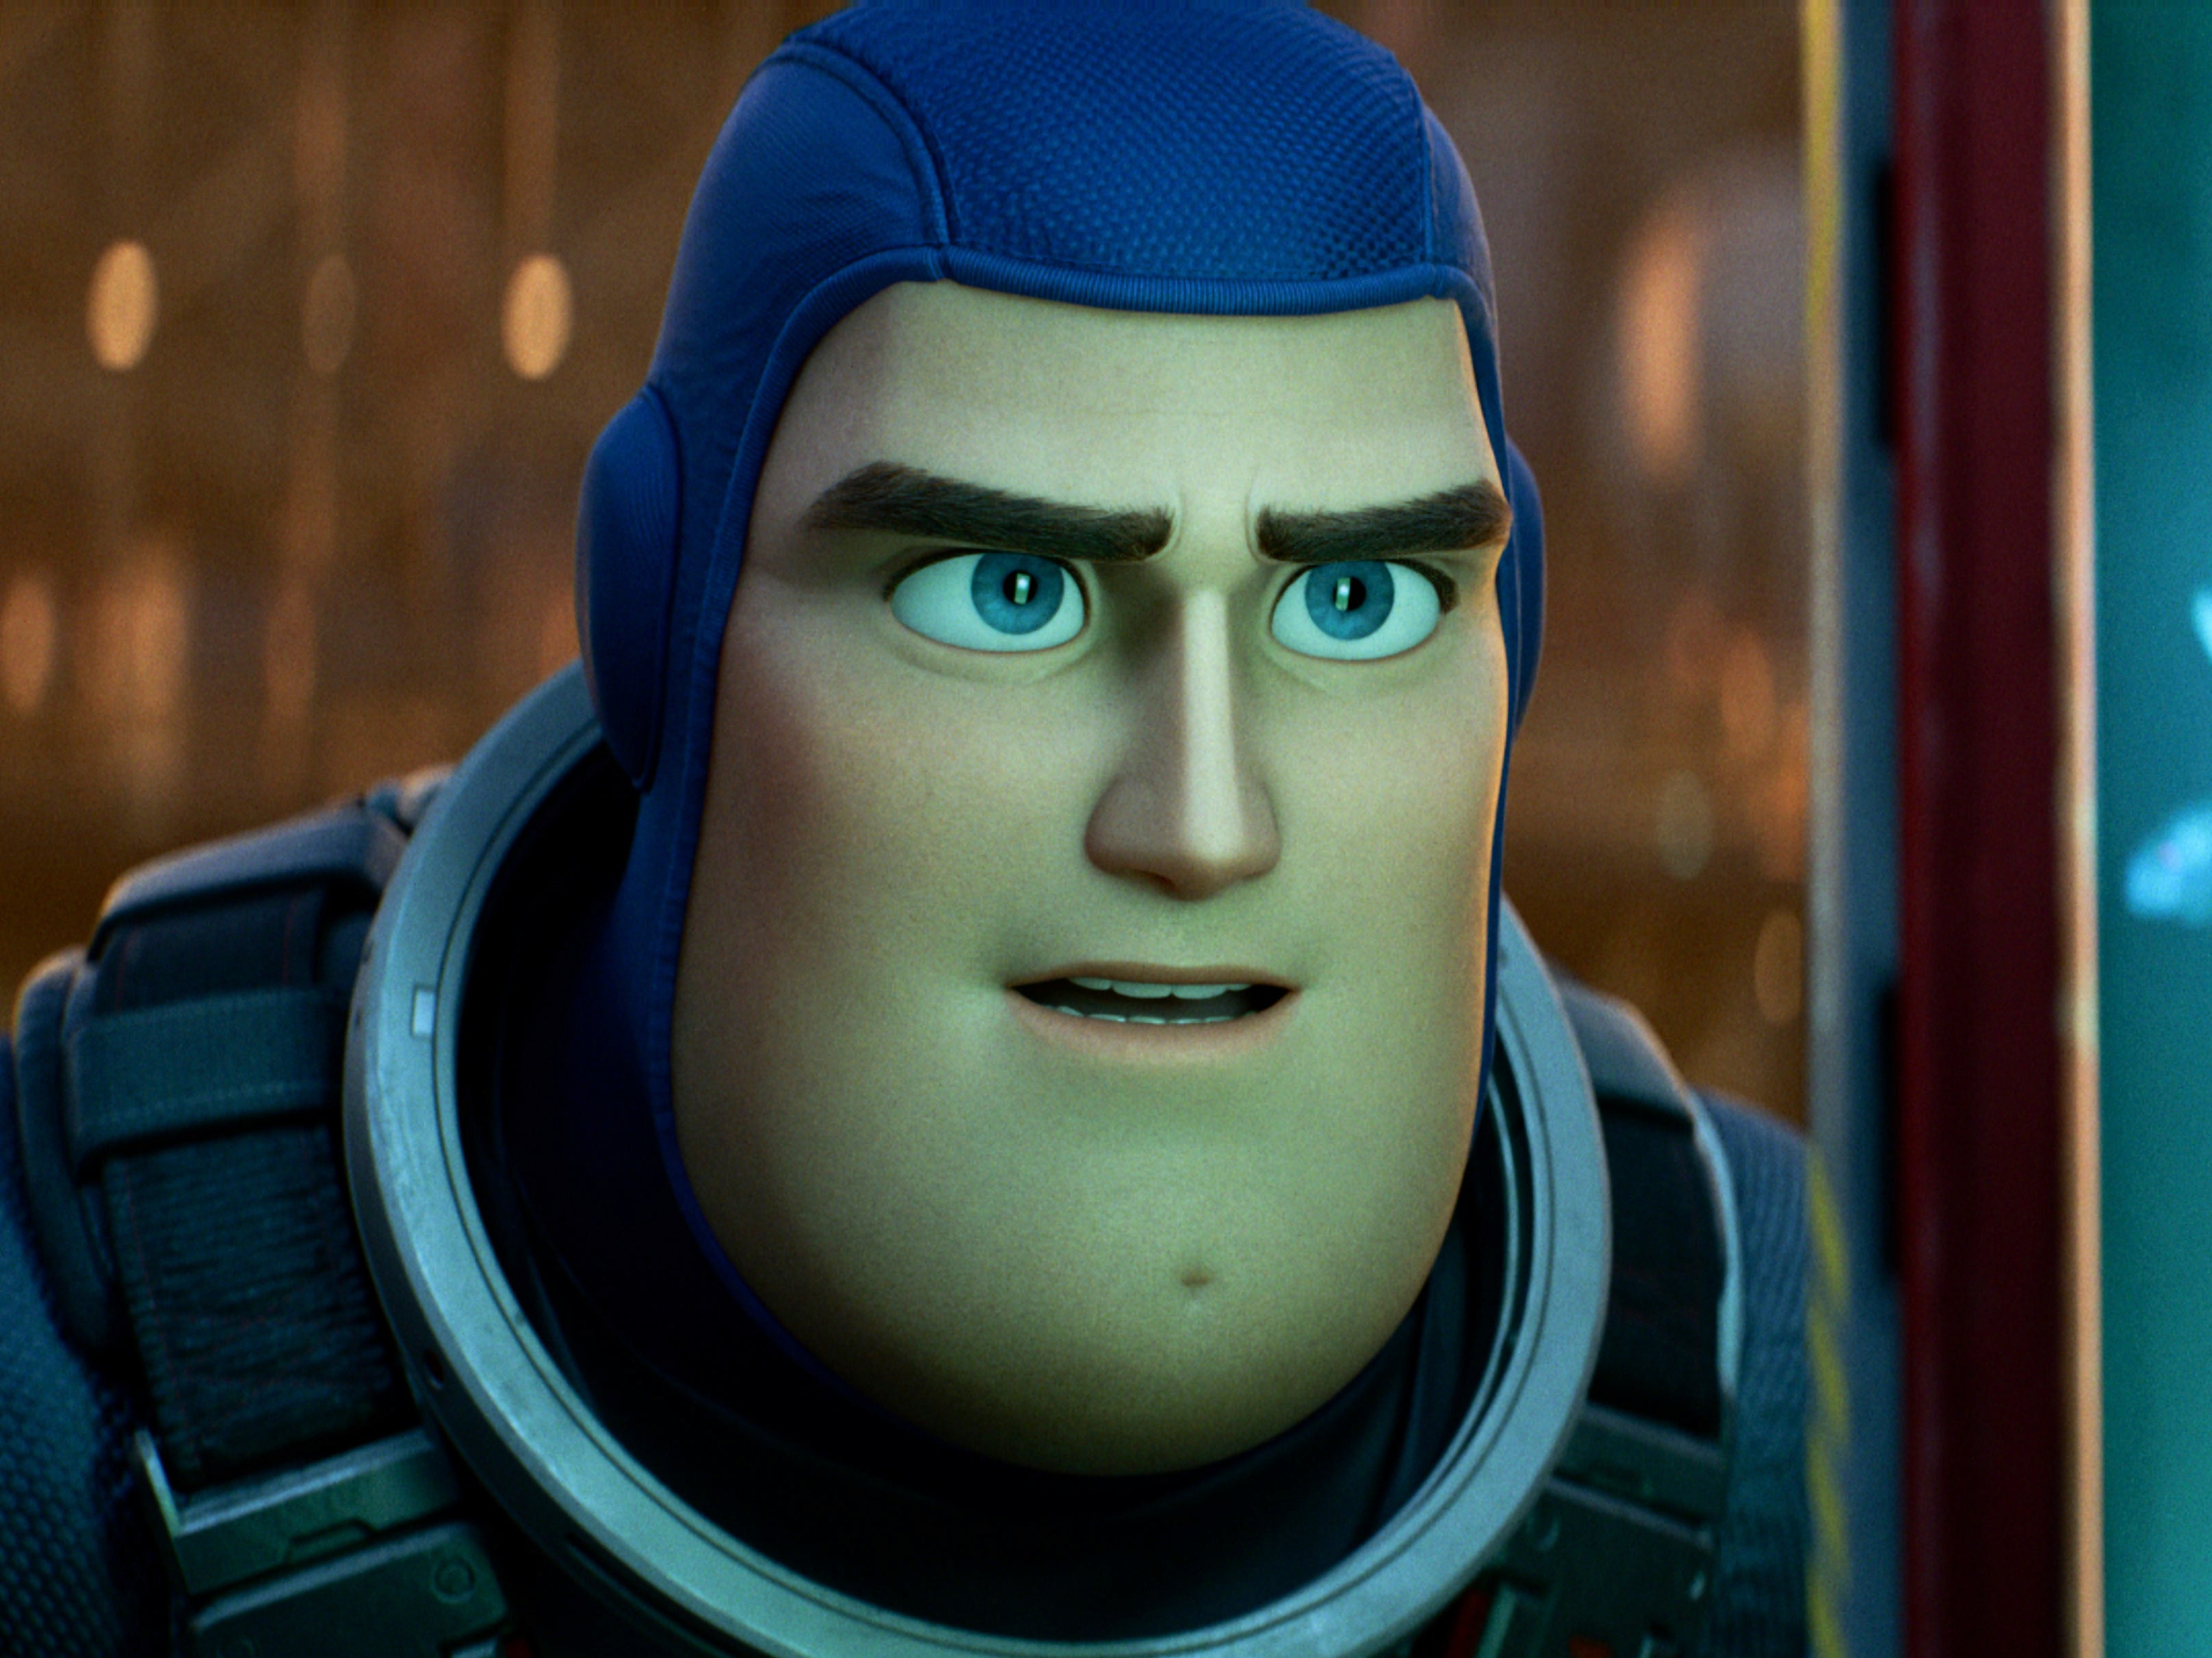 Buzz Lightyear, voiced by Chris Evans, in a scene from the animated film ‘Lightyear'